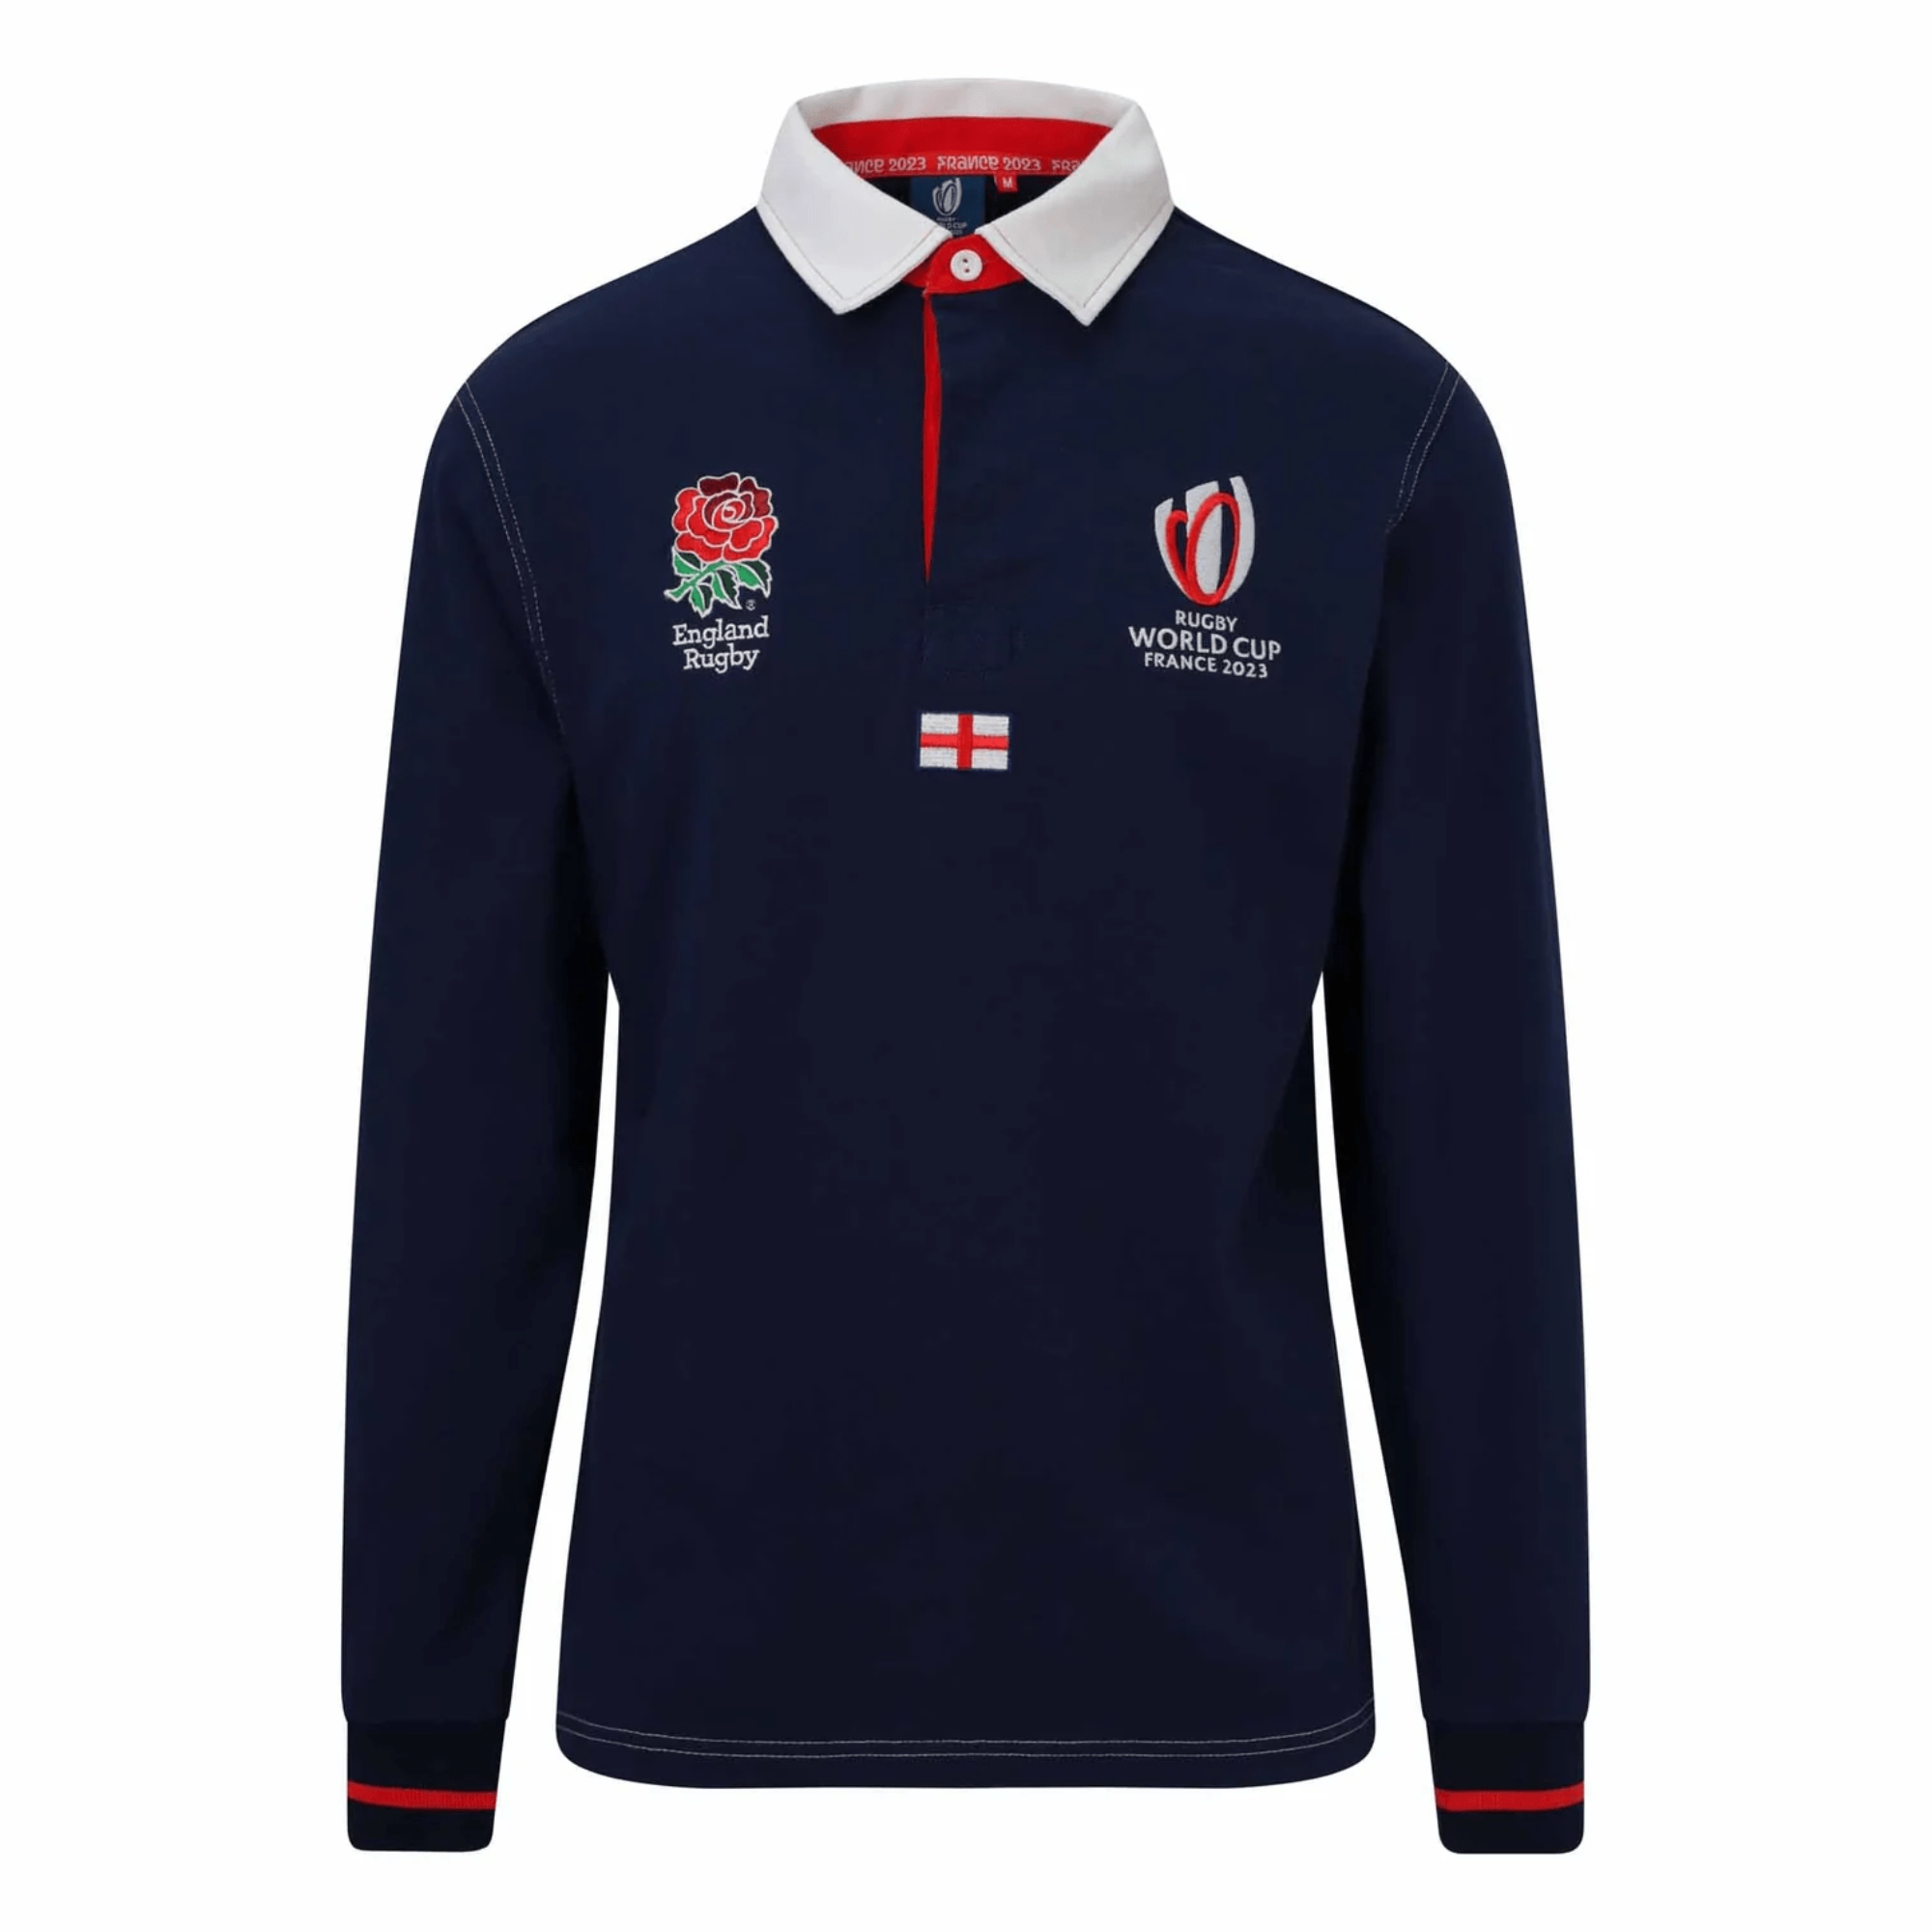 Rugby World Cup 23 x England Rugger Official RWC 23 Classic Rugby Jersey 